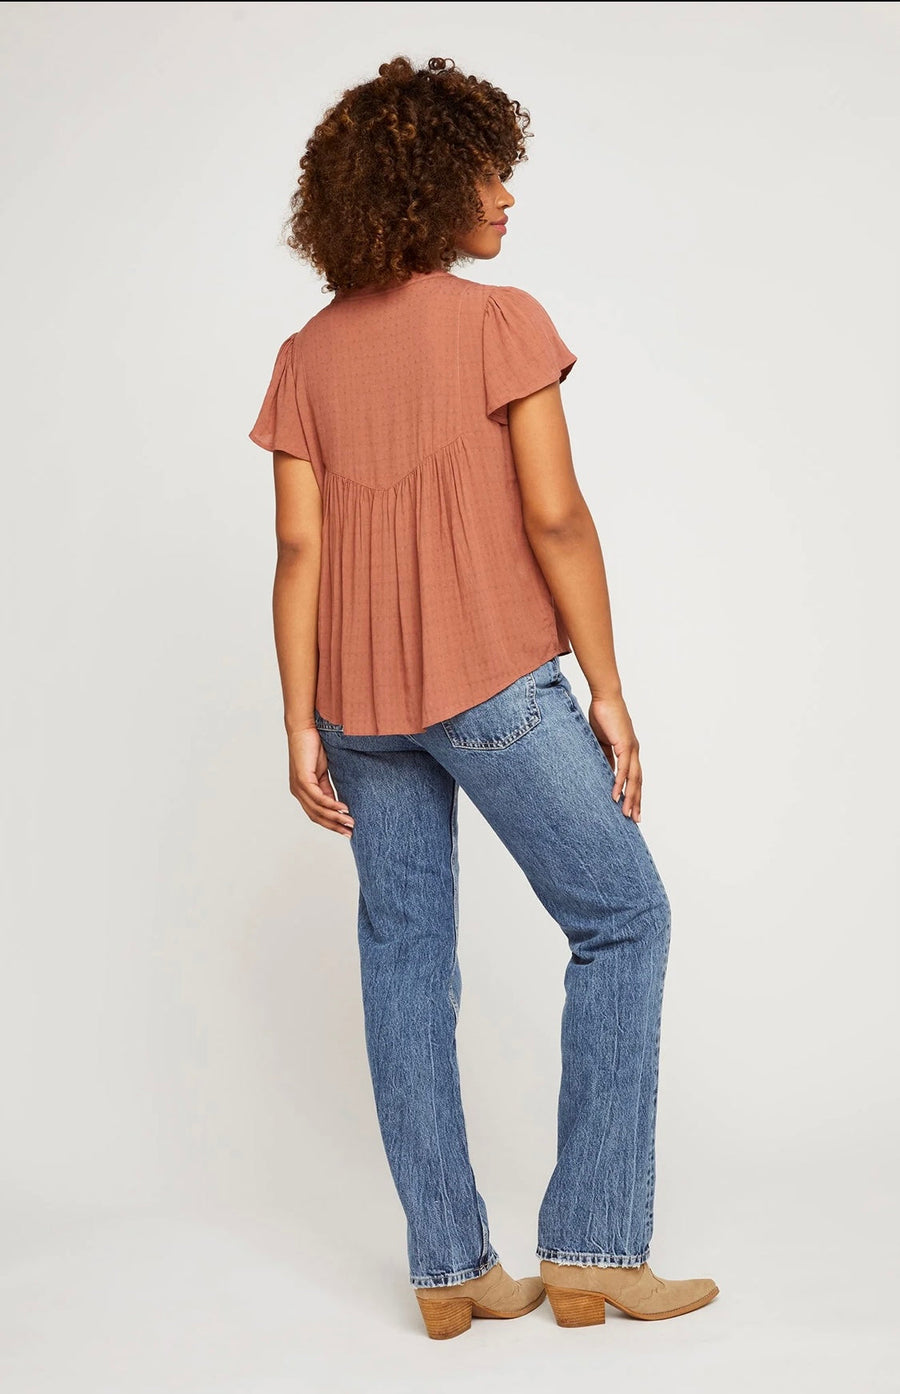 Gentle Fawn Ava Top - Canyon